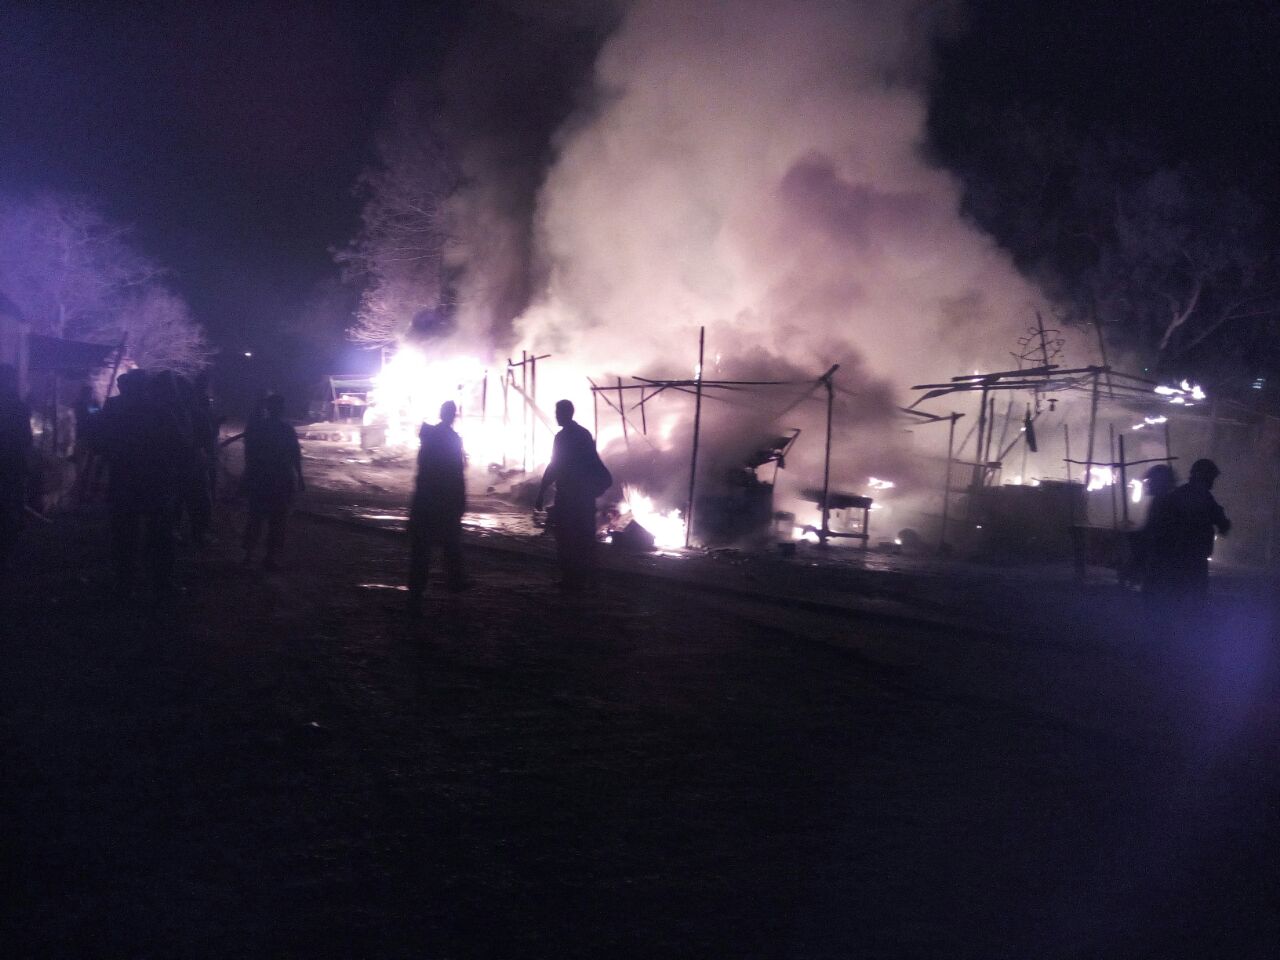 At the place of Kak Bridge in area of Sahala station a sudden fire flashed in the Khokha market in mid night